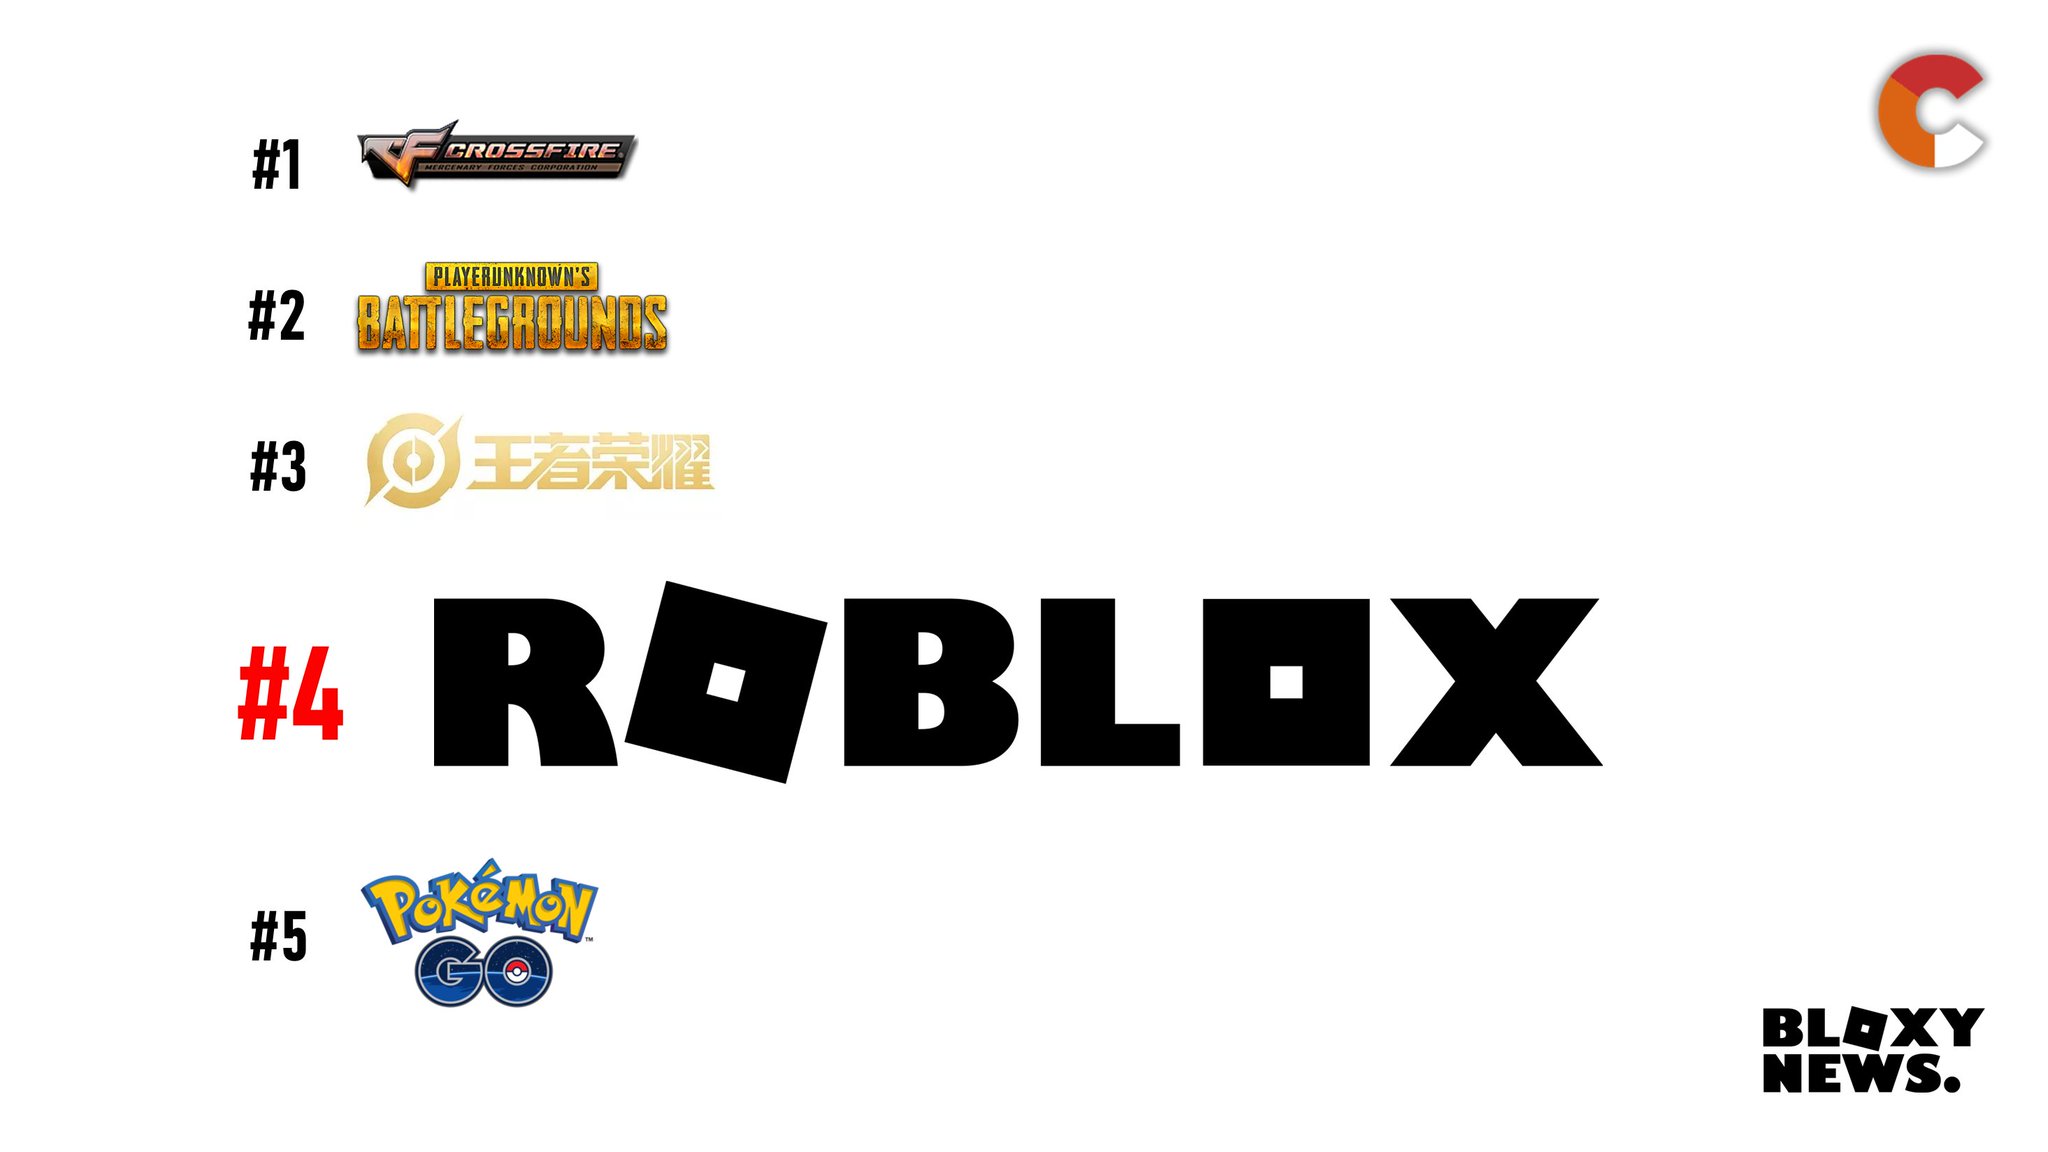 Bloxy News On Twitter Roblox Has Just Overtaken Pokemongoapp S 2018 Record In Terms Of Monthly Active Users Mau Ranking It 4 On The Games With The Most Monthly Active Users Charts - crossfire roblox roblox